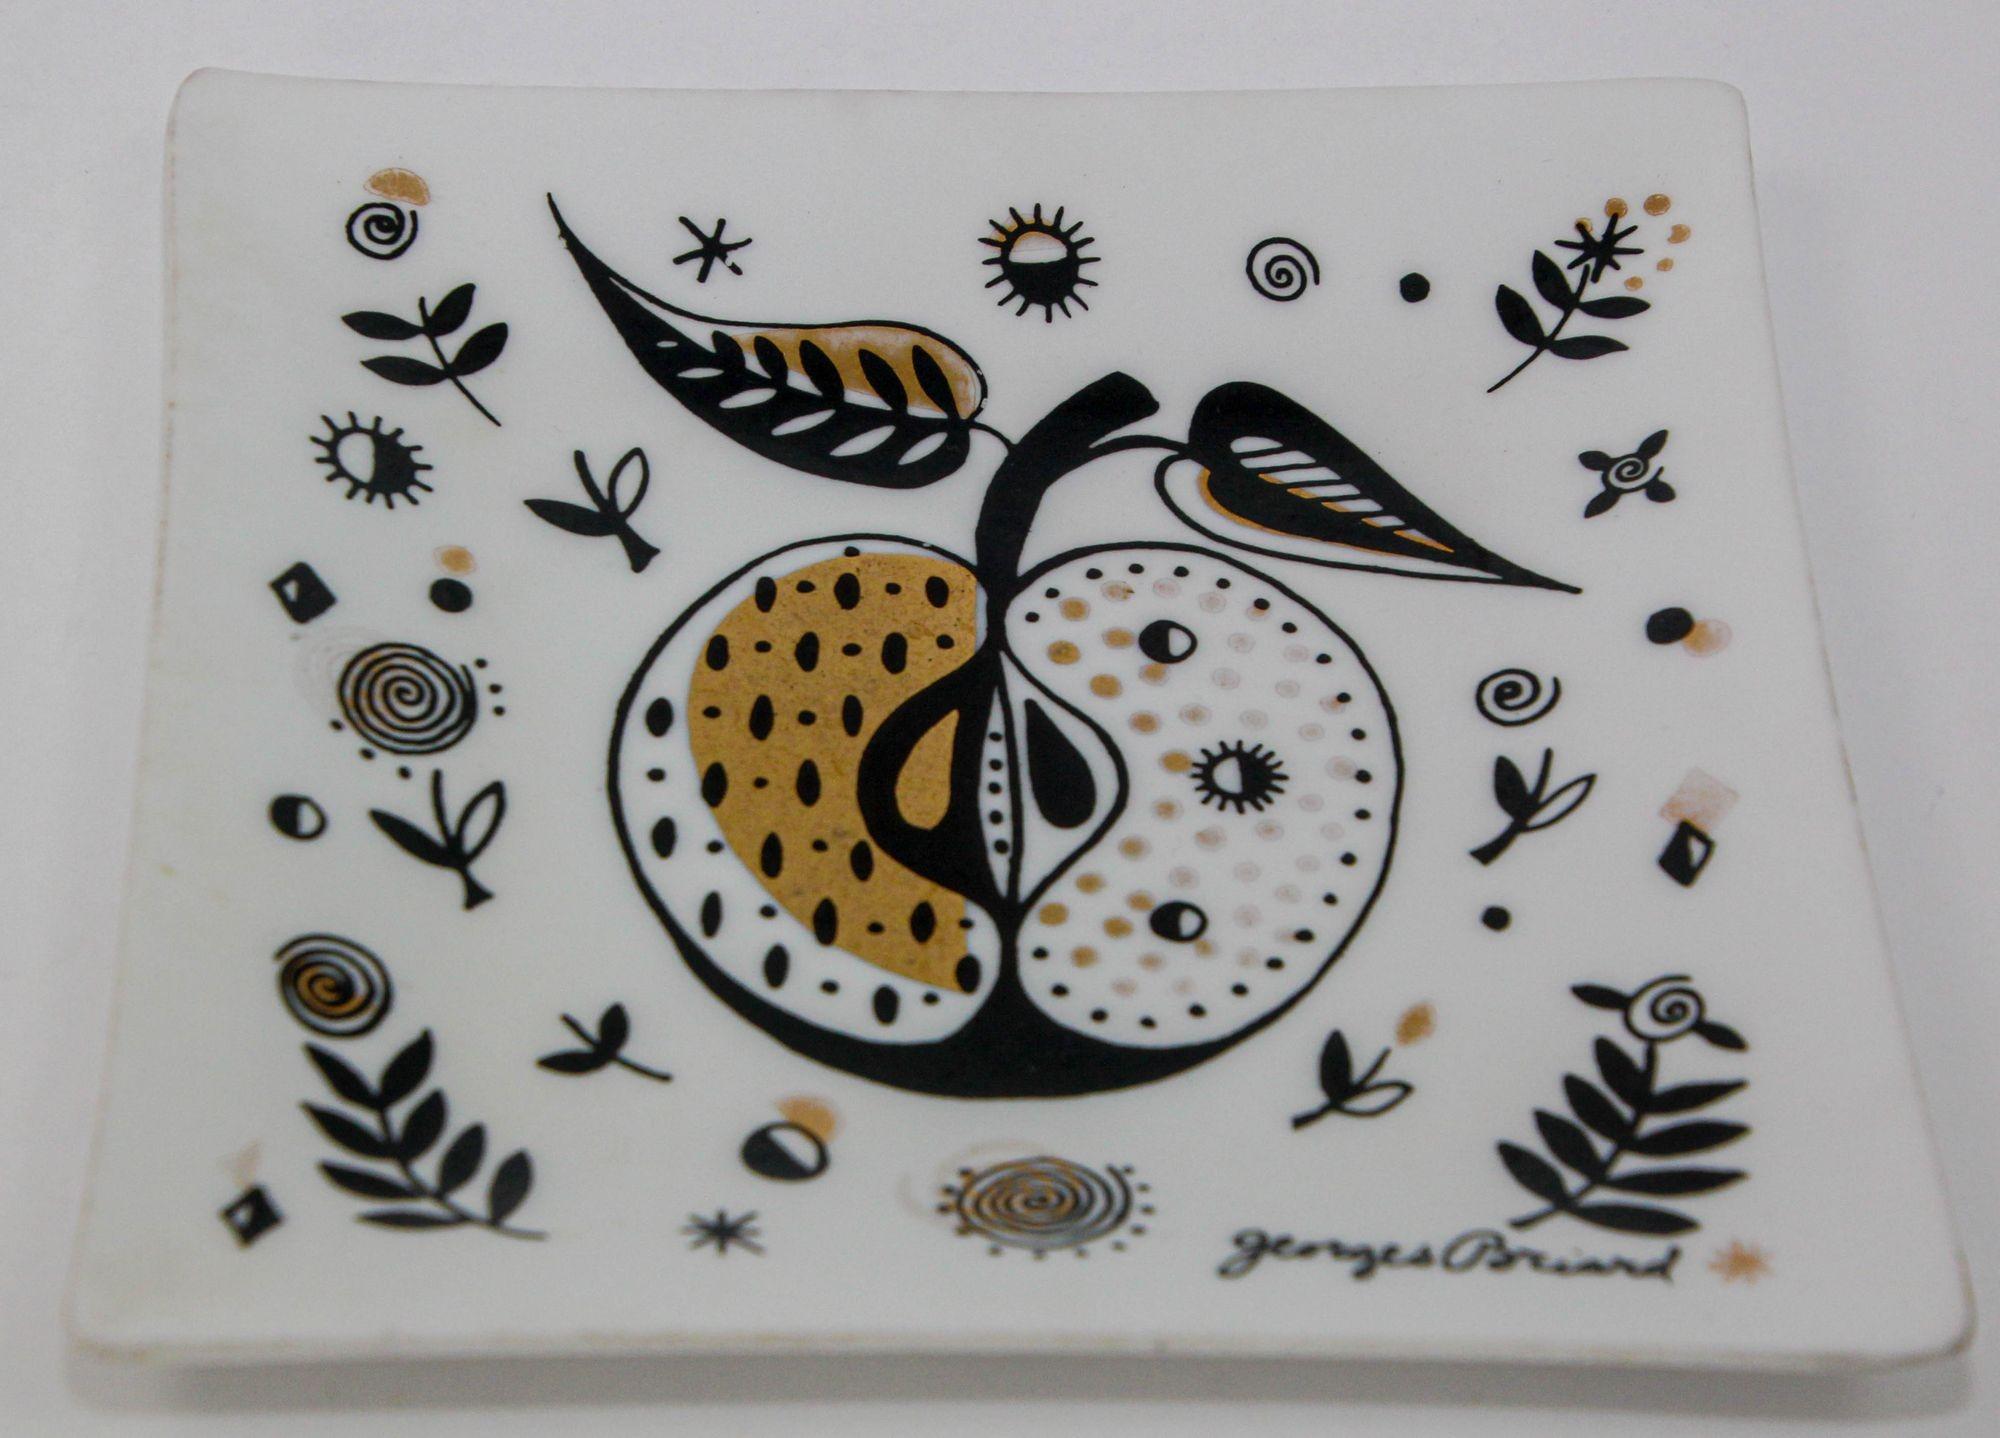 Georges Briard 'Forbidden Fruit' White Art Glass Dish with Black and Gold Design For Sale 1